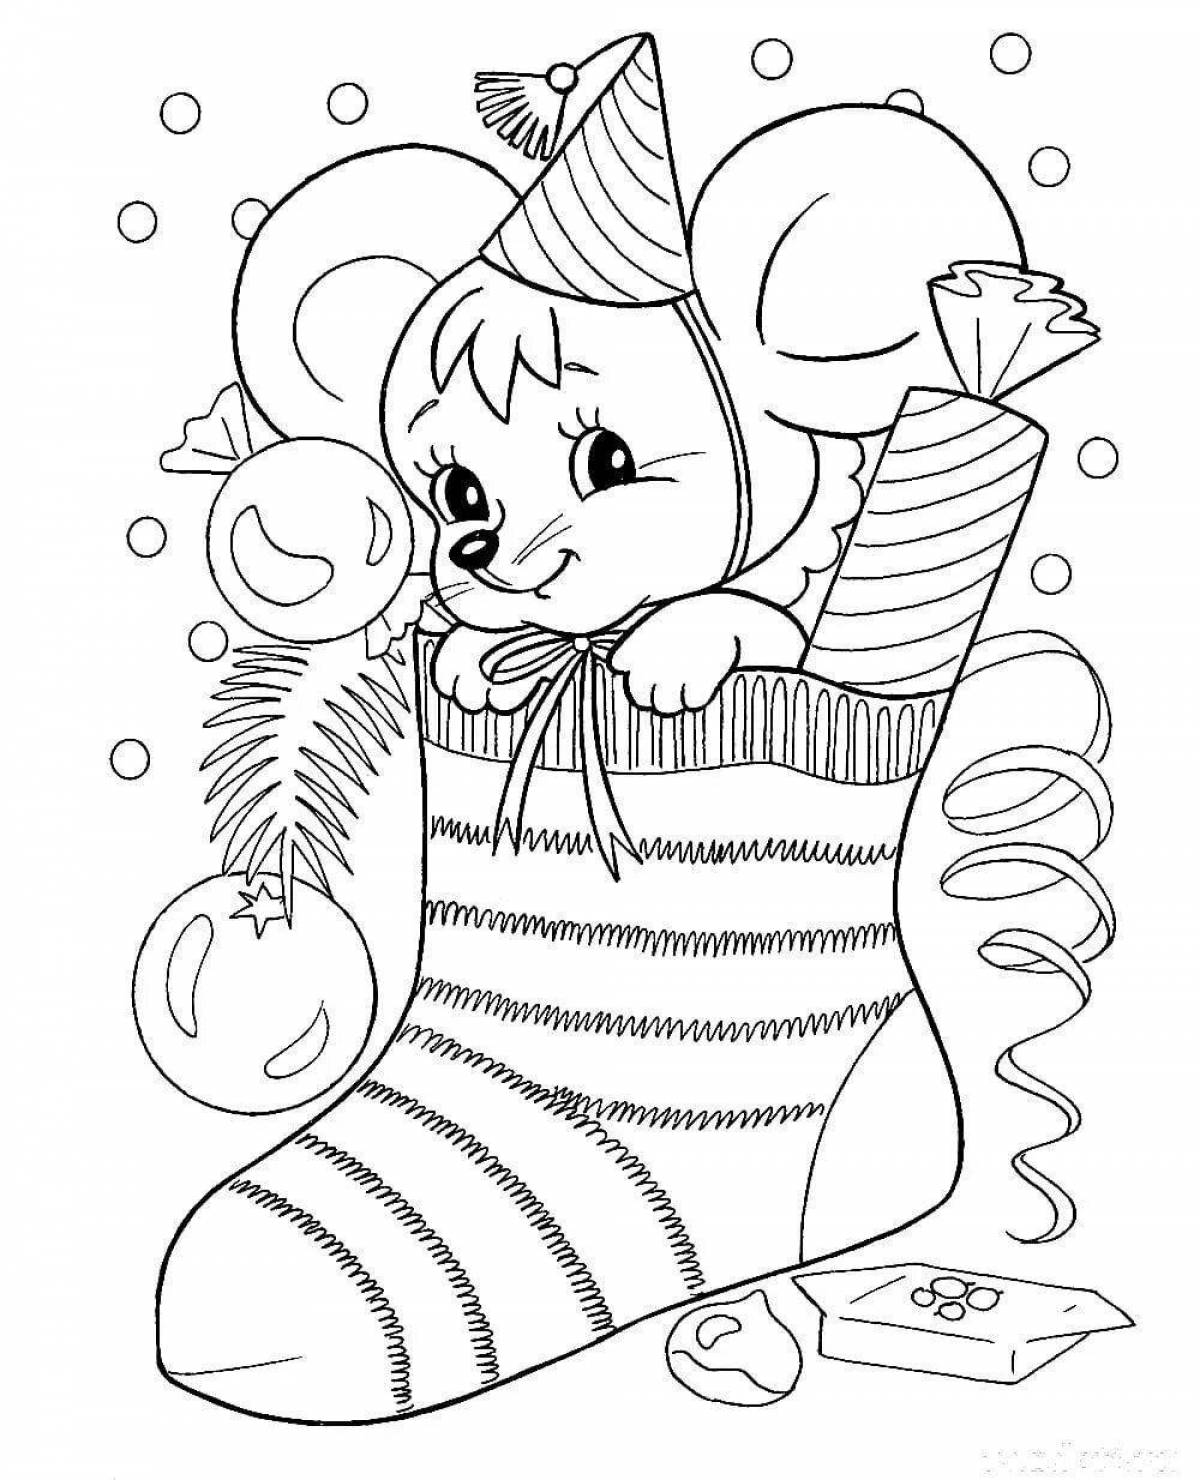 A cold mouse in winter